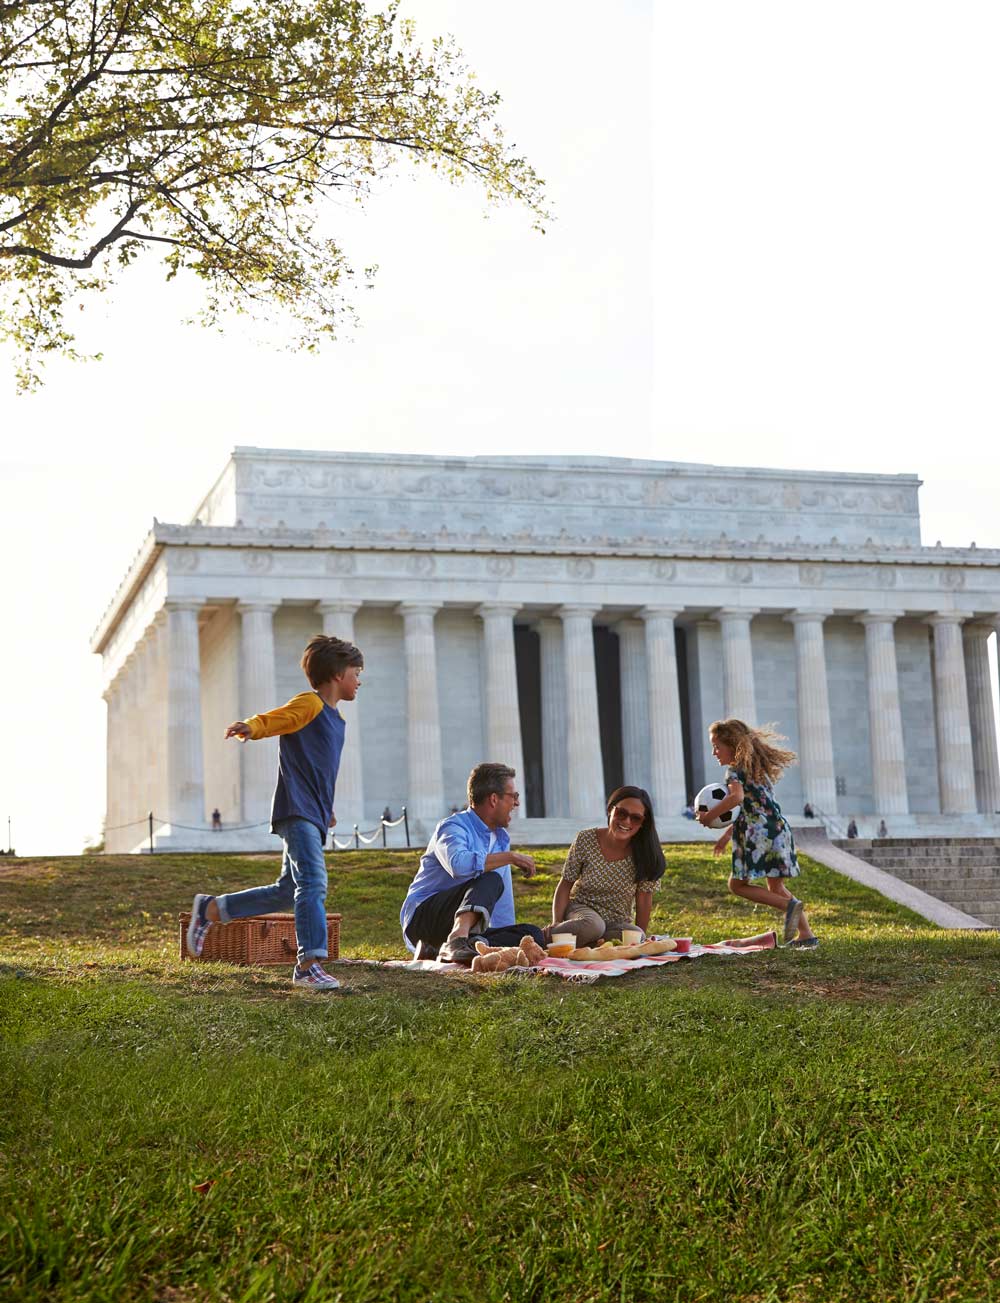 Familienpicknick in der National Mall am Lincoln Memorial